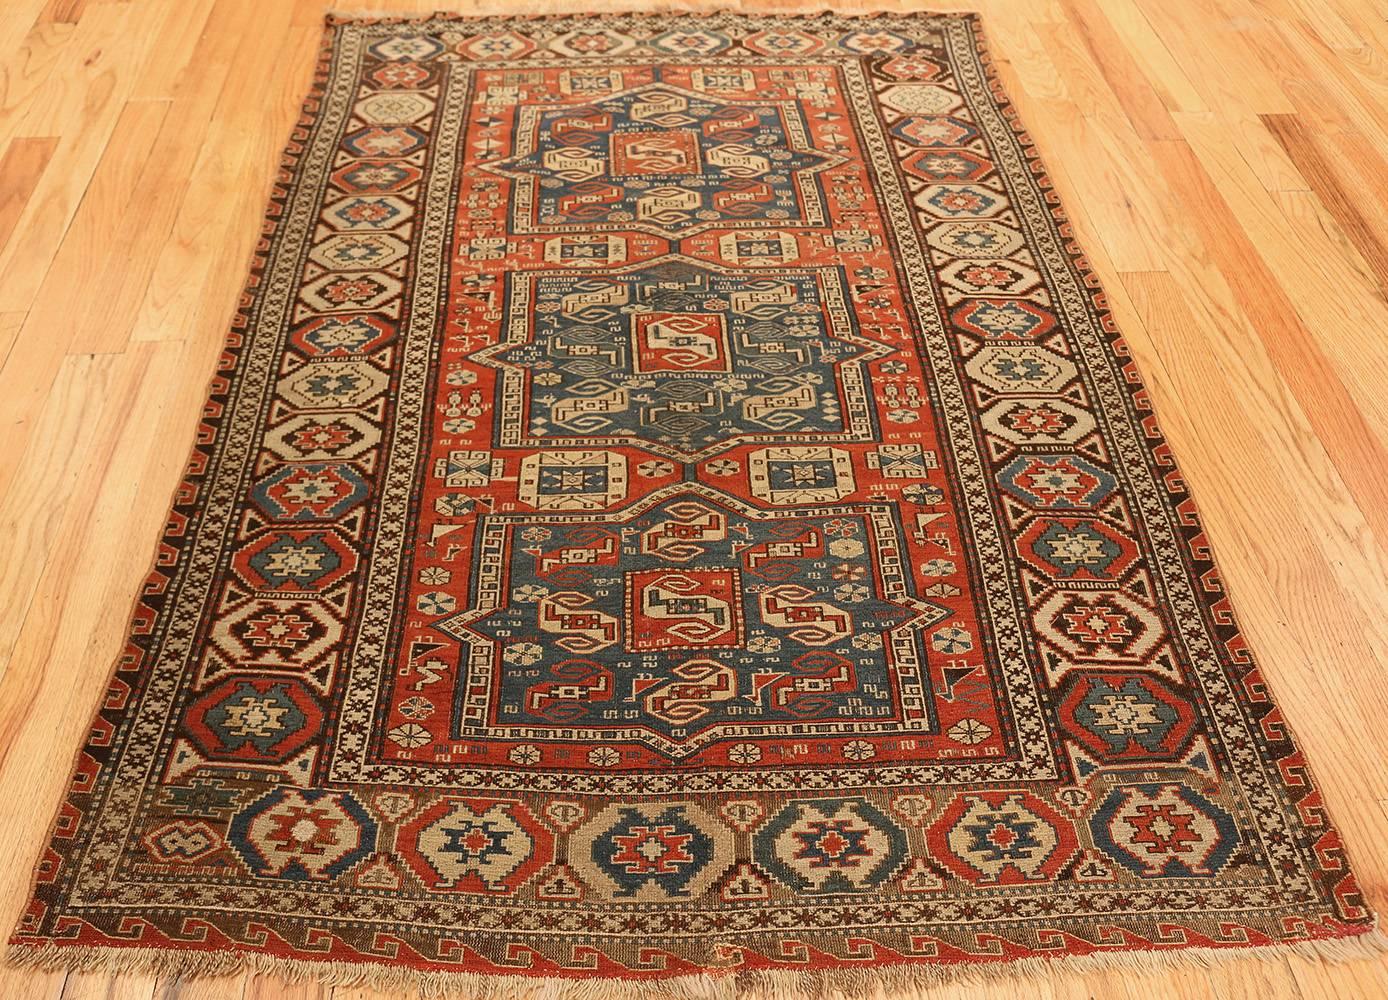 20th Century Small Antique Tribal Soumak Caucasian Rug. Size: 4 ft 4 in x 6 ft 5 in 